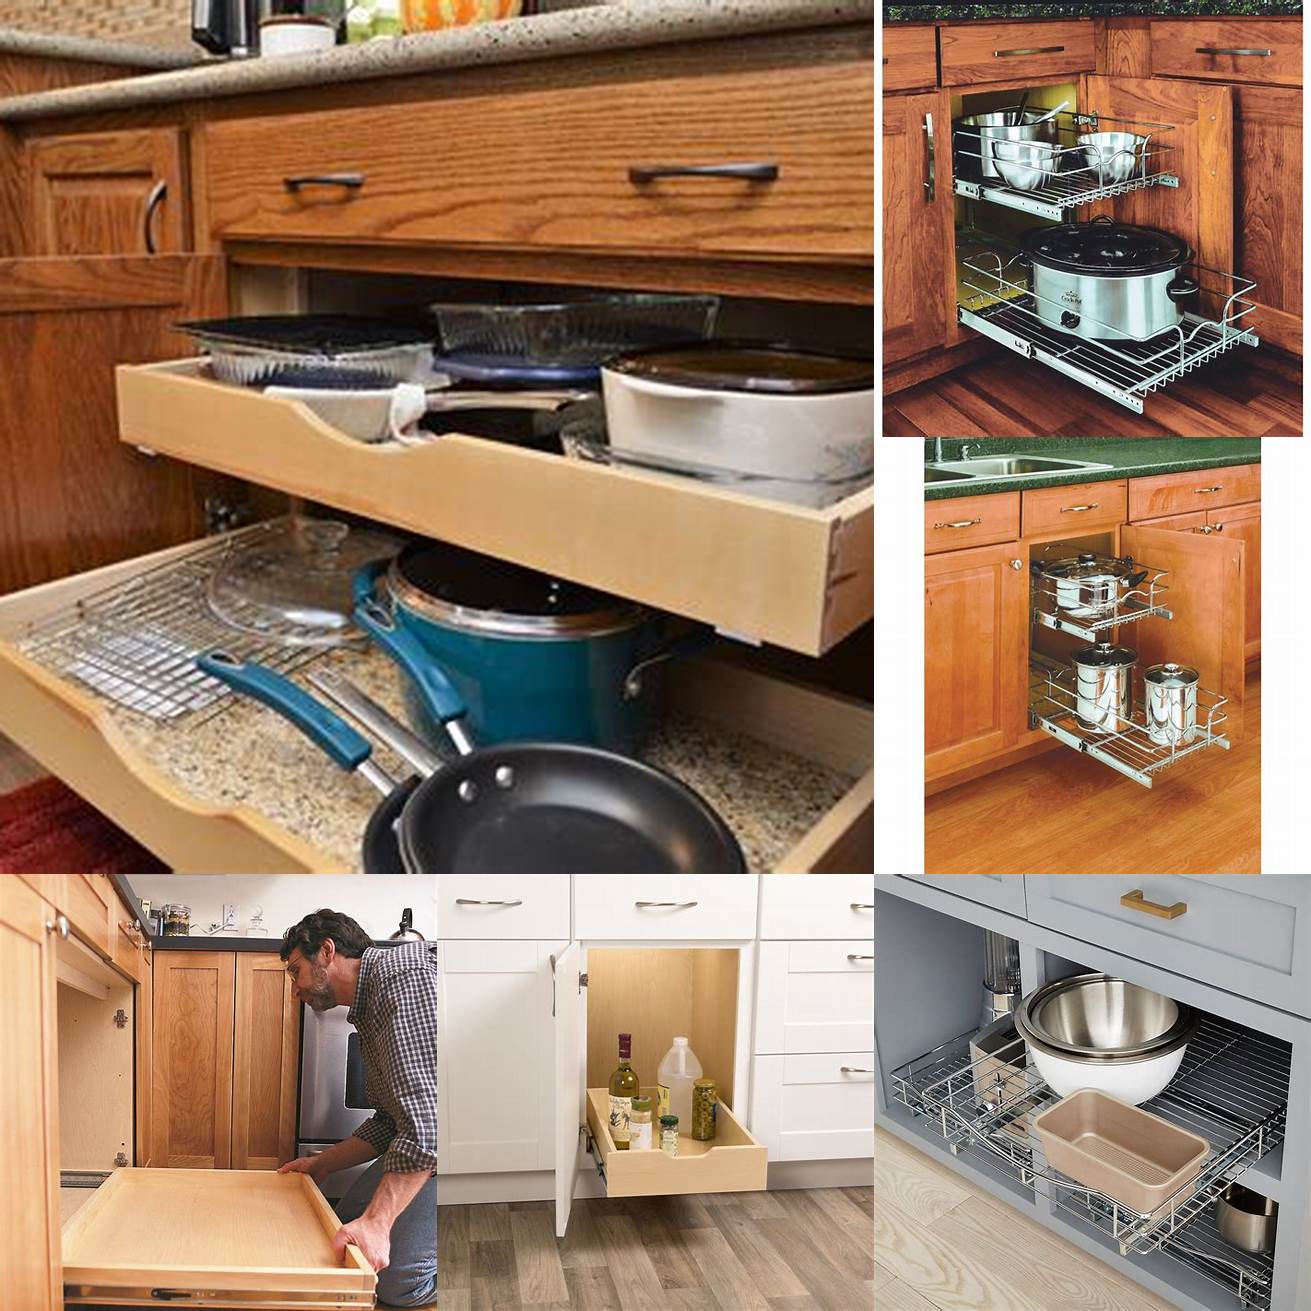 Pull-out drawers an easy way to access everything in your cabinets